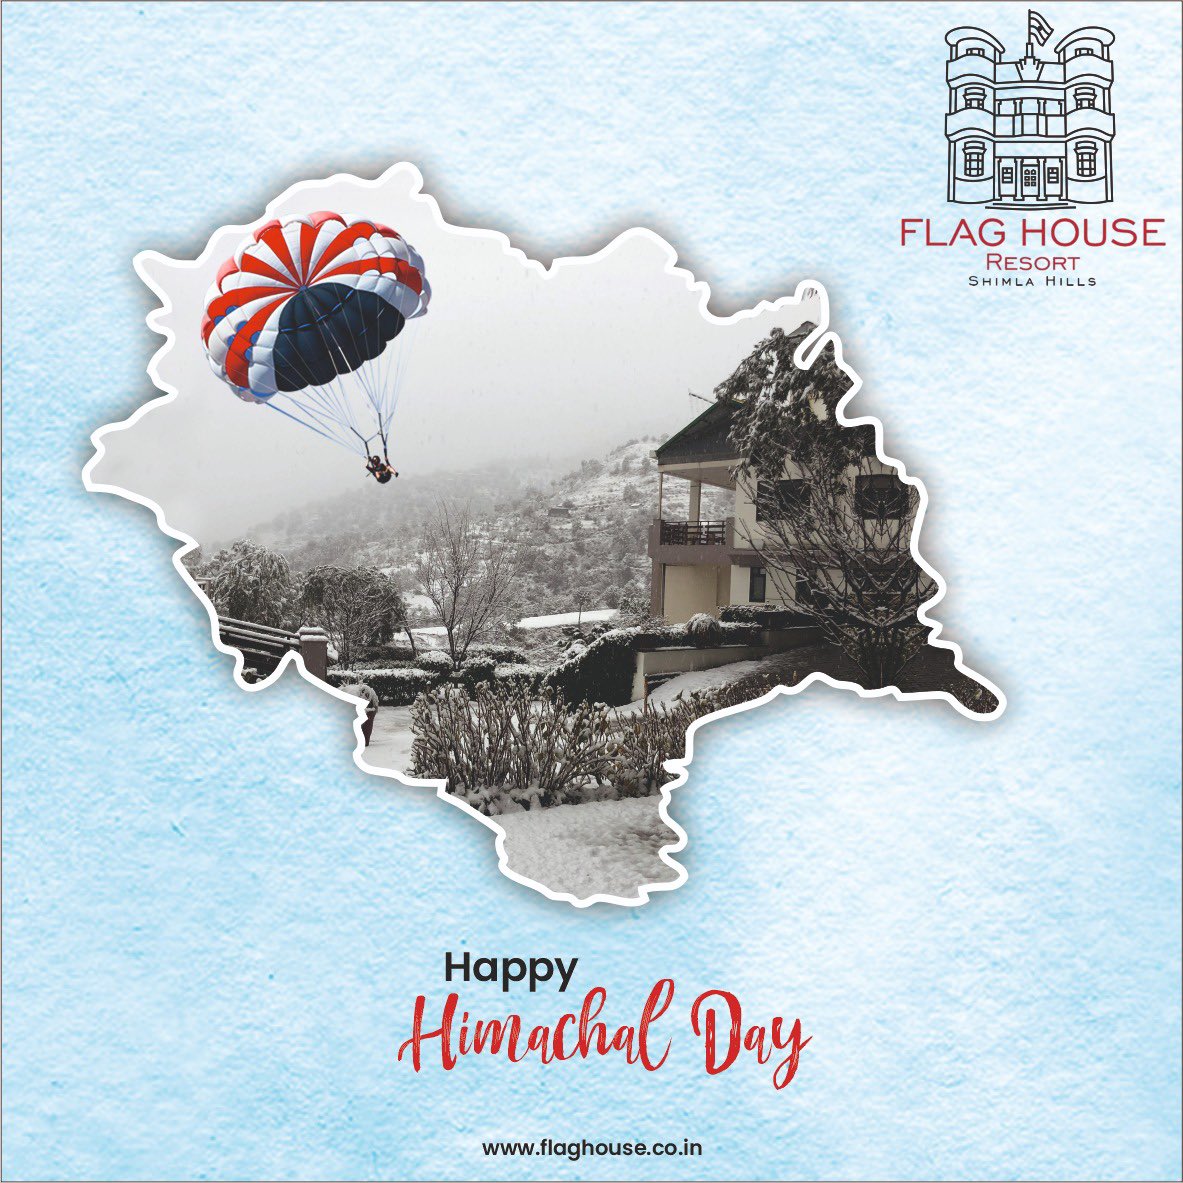 May this land of natural beauty attain more prosperity in the years to come. Happy Himachal Day. 🗻🏔🏕⛺ #flaghouseresort #junga #travel #flaghouseresort #flaghouseresortjunga #HimachalDay #shimla #mountainlife #HimachalPradesh #kufri #chail